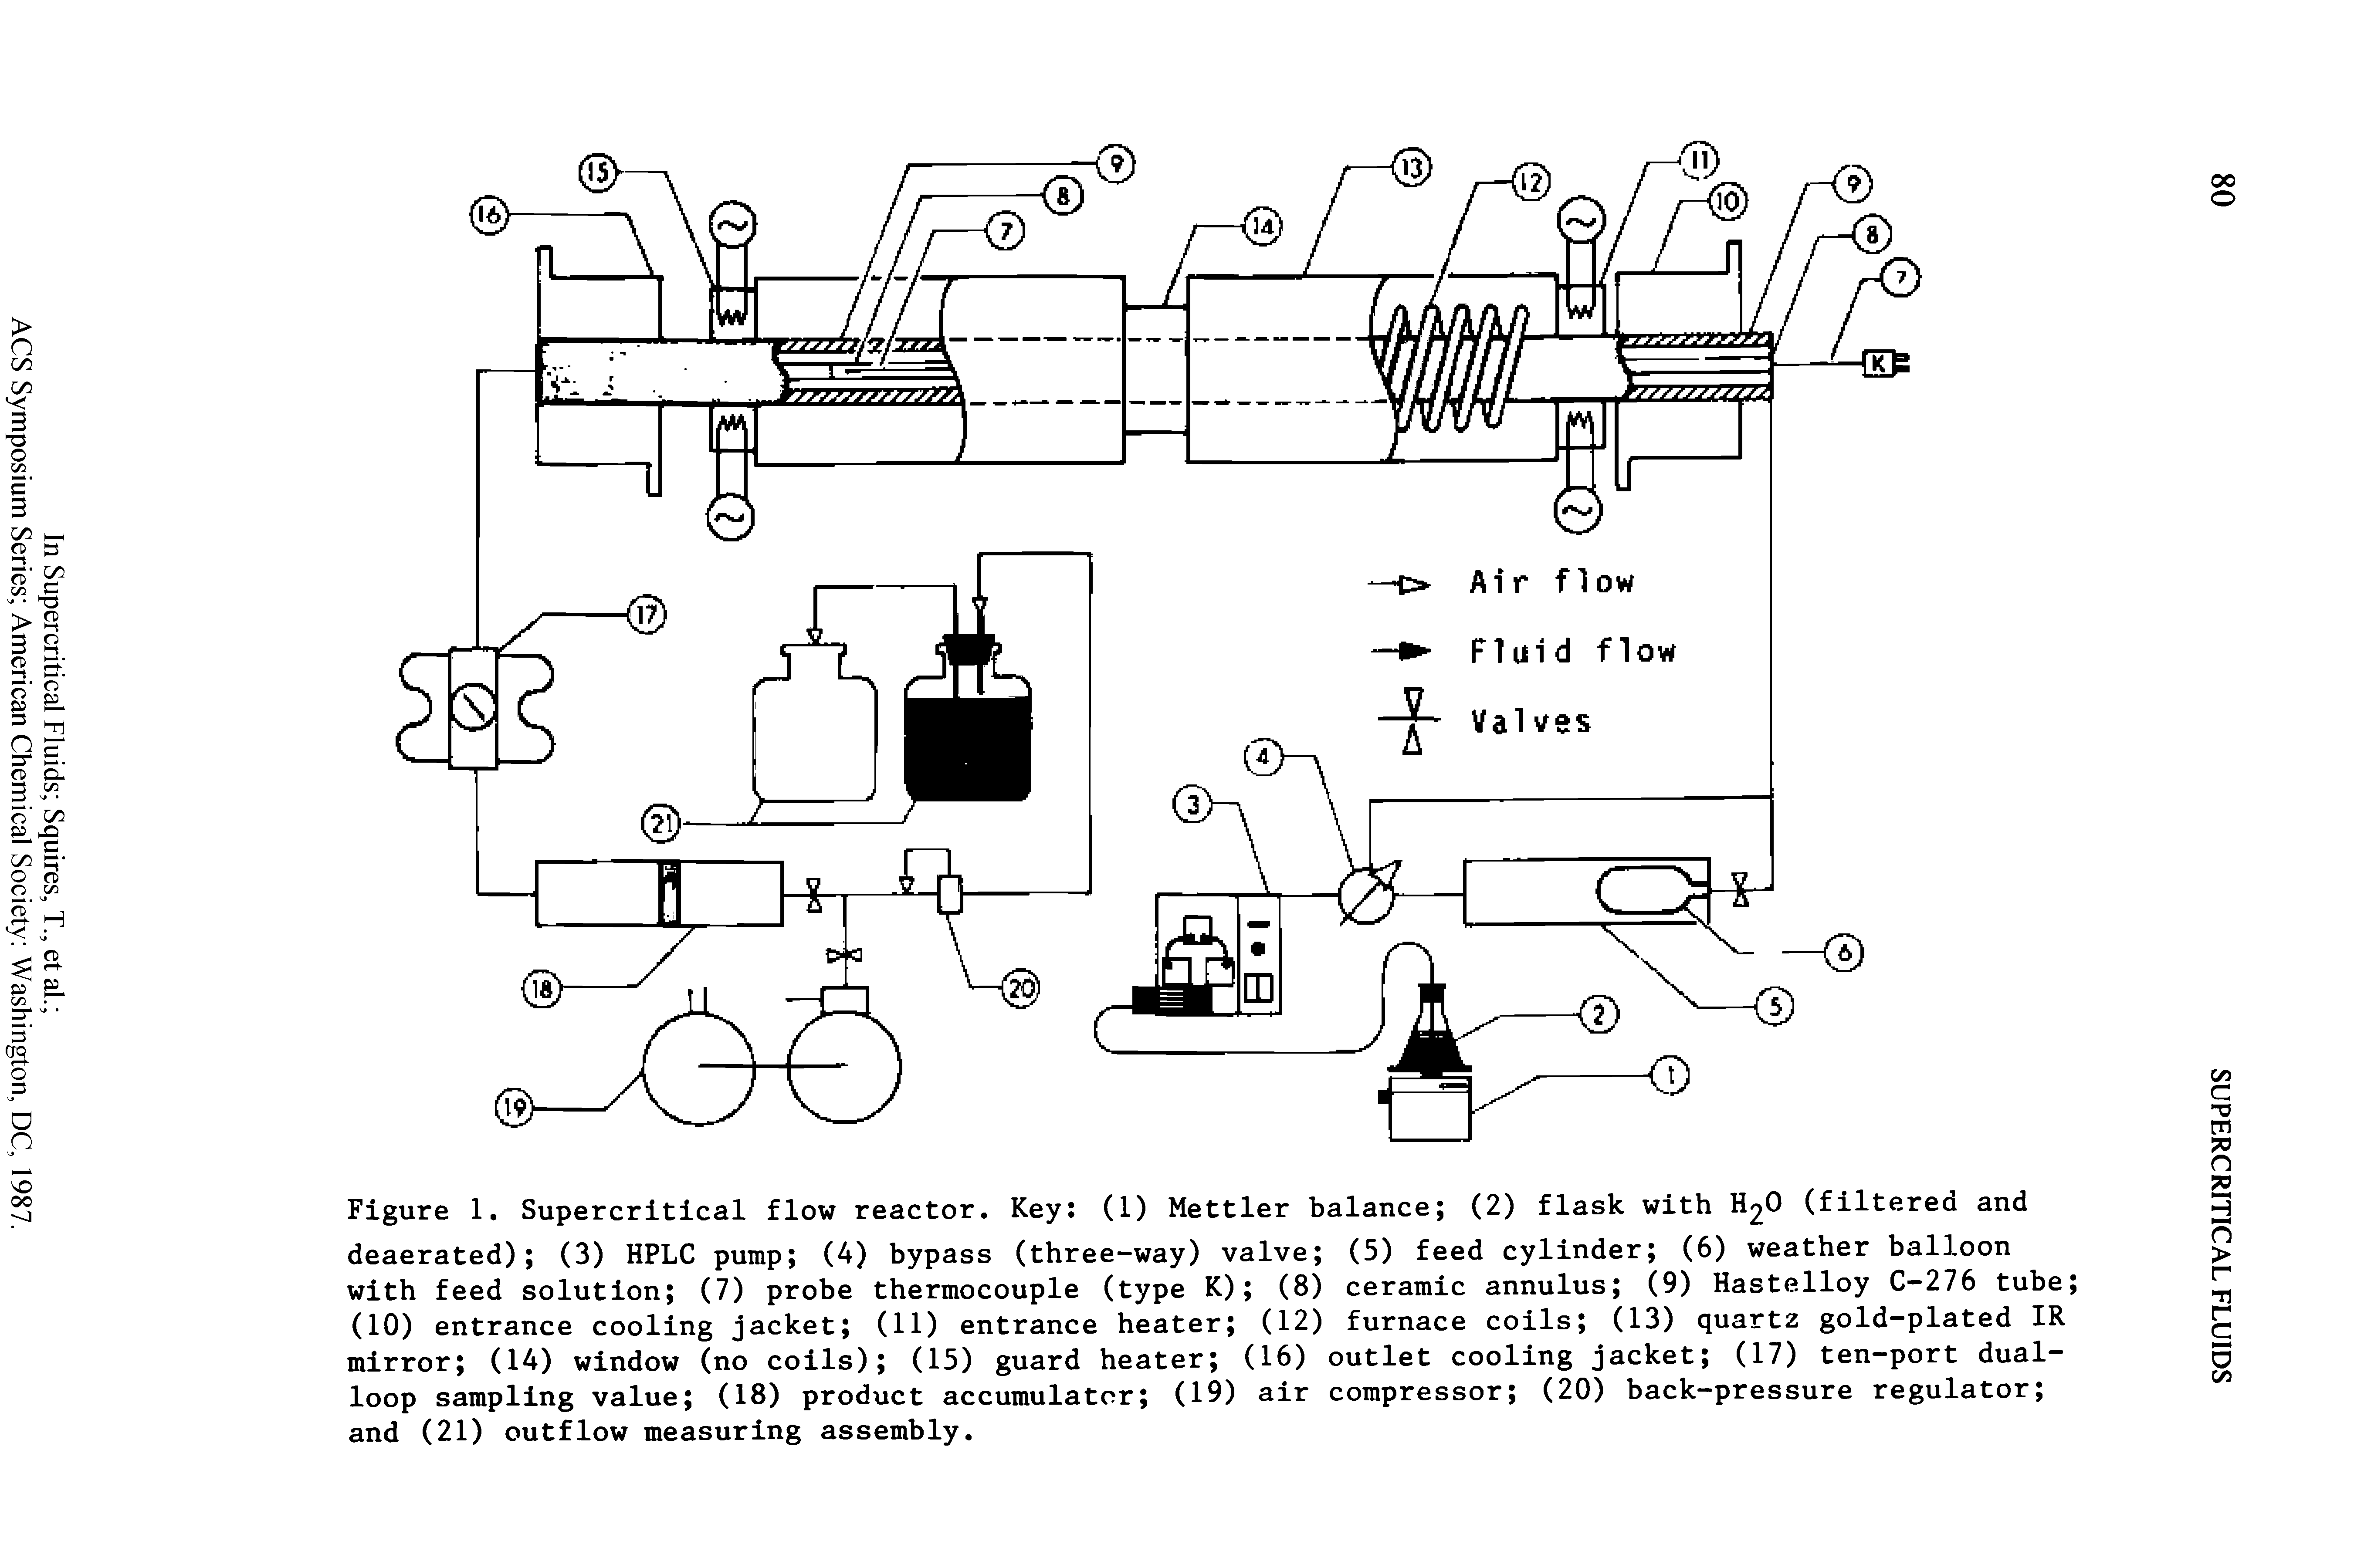 Figure 1. Supercritical flow reactor. Key (I) Mettler balance (2) flask with 1 0 (filtered and deaerated) (3) HPLC pump (4) bypass (three-way) valve (5) feed cylinder (6) weather balloon with feed solution (7) probe thermocouple (type K) (8) ceramic annulus (9) Hastelloy C-276 tube (10) entrance cooling jacket (11) entrance heater (12) furnace coils (13) quartz gold-plated IR mirror (14) window (no coils) (15) guard heater (16) outlet cooling jacket (17) ten-port dualloop sampling value (18) product accumulator (19) air compressor (20) back-pressure regulator and (21) outflow measuring assembly.